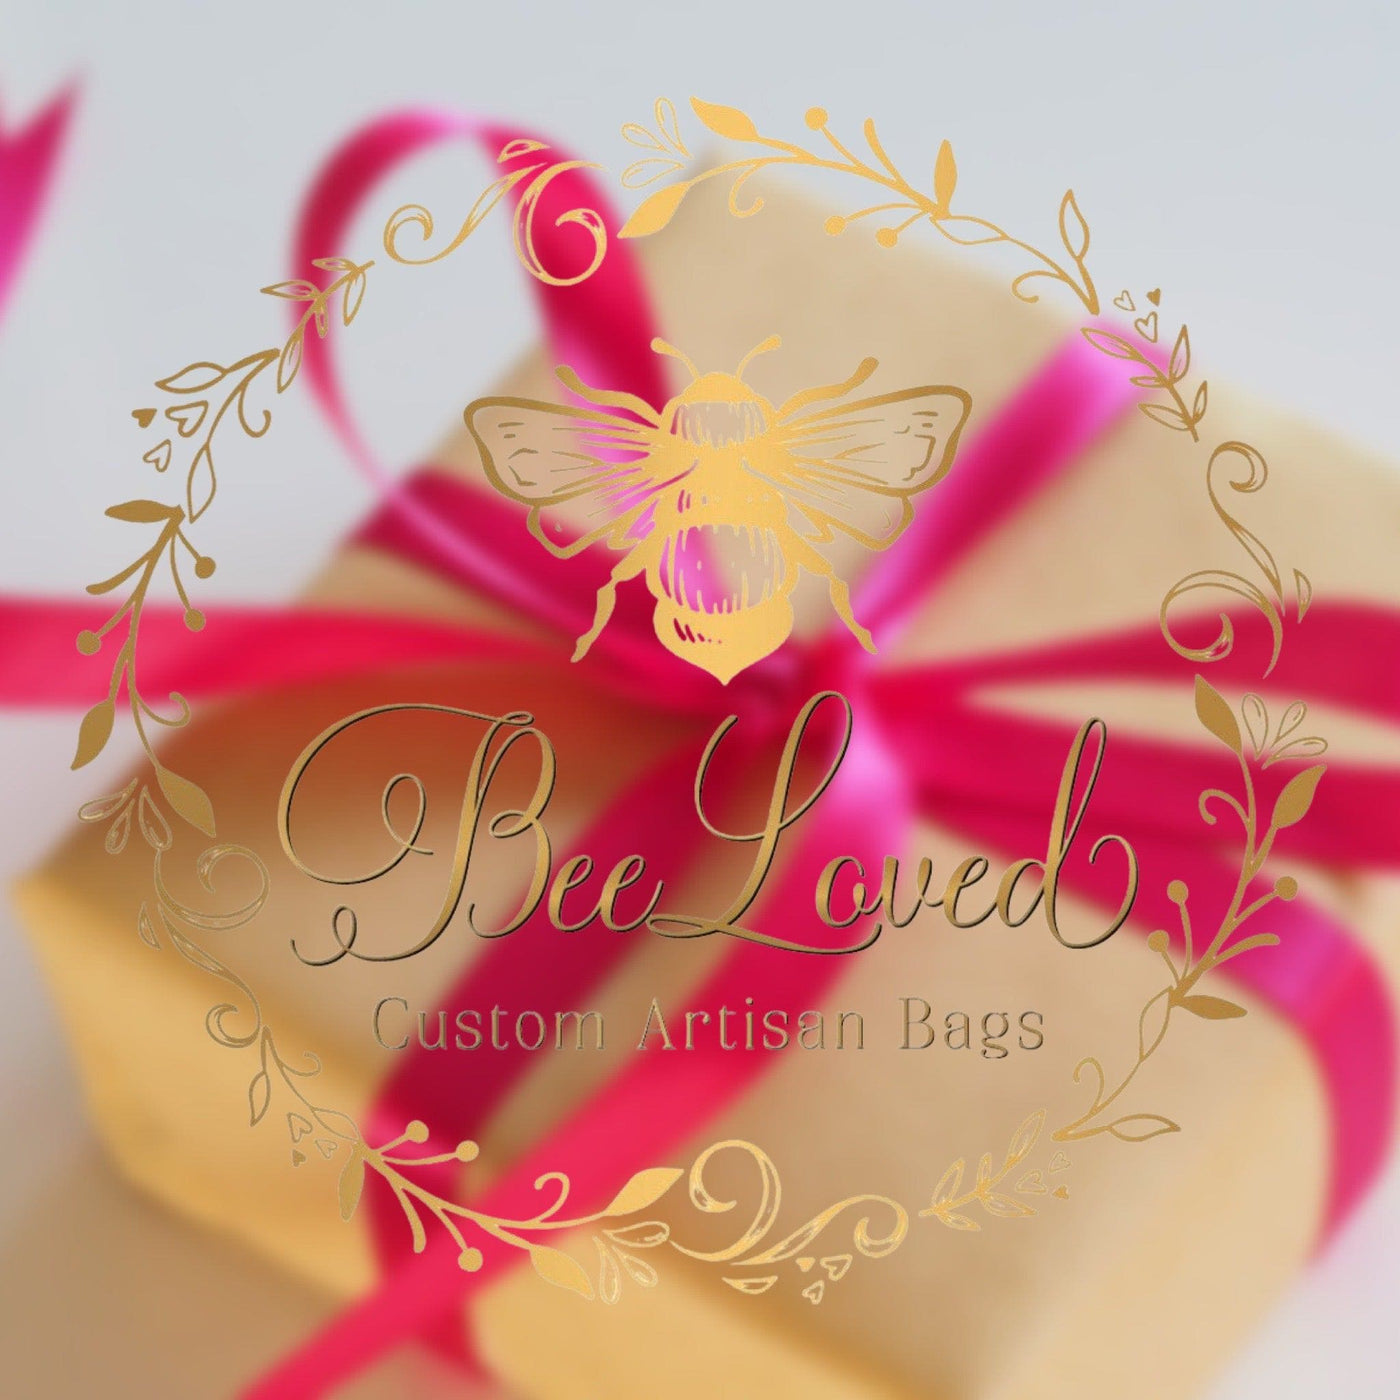 BeeLoved Custom Artisan Bags and Gifts Gift Cards $50.00 Share the Love BeeLoved Gift Card